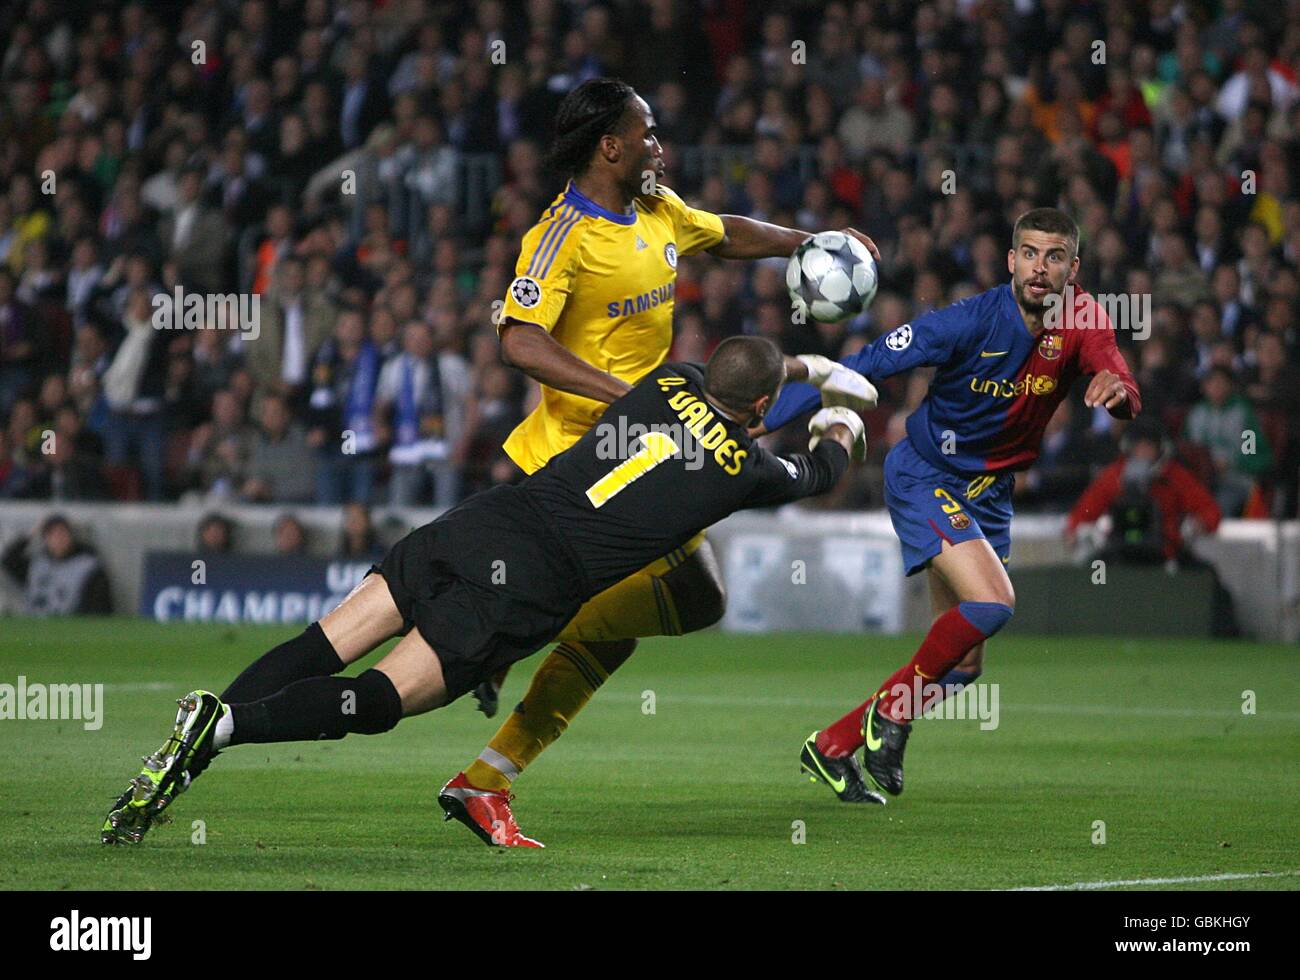 Soccer - UEFA Champions League - Semi Final - First Leg - Barcelona v Chelsea - Nou Camp. Barcelona goalkeeper Victor Valdes (centre) makes a save to block the shot from Chelsea's Didier Drogba. Stock Photo